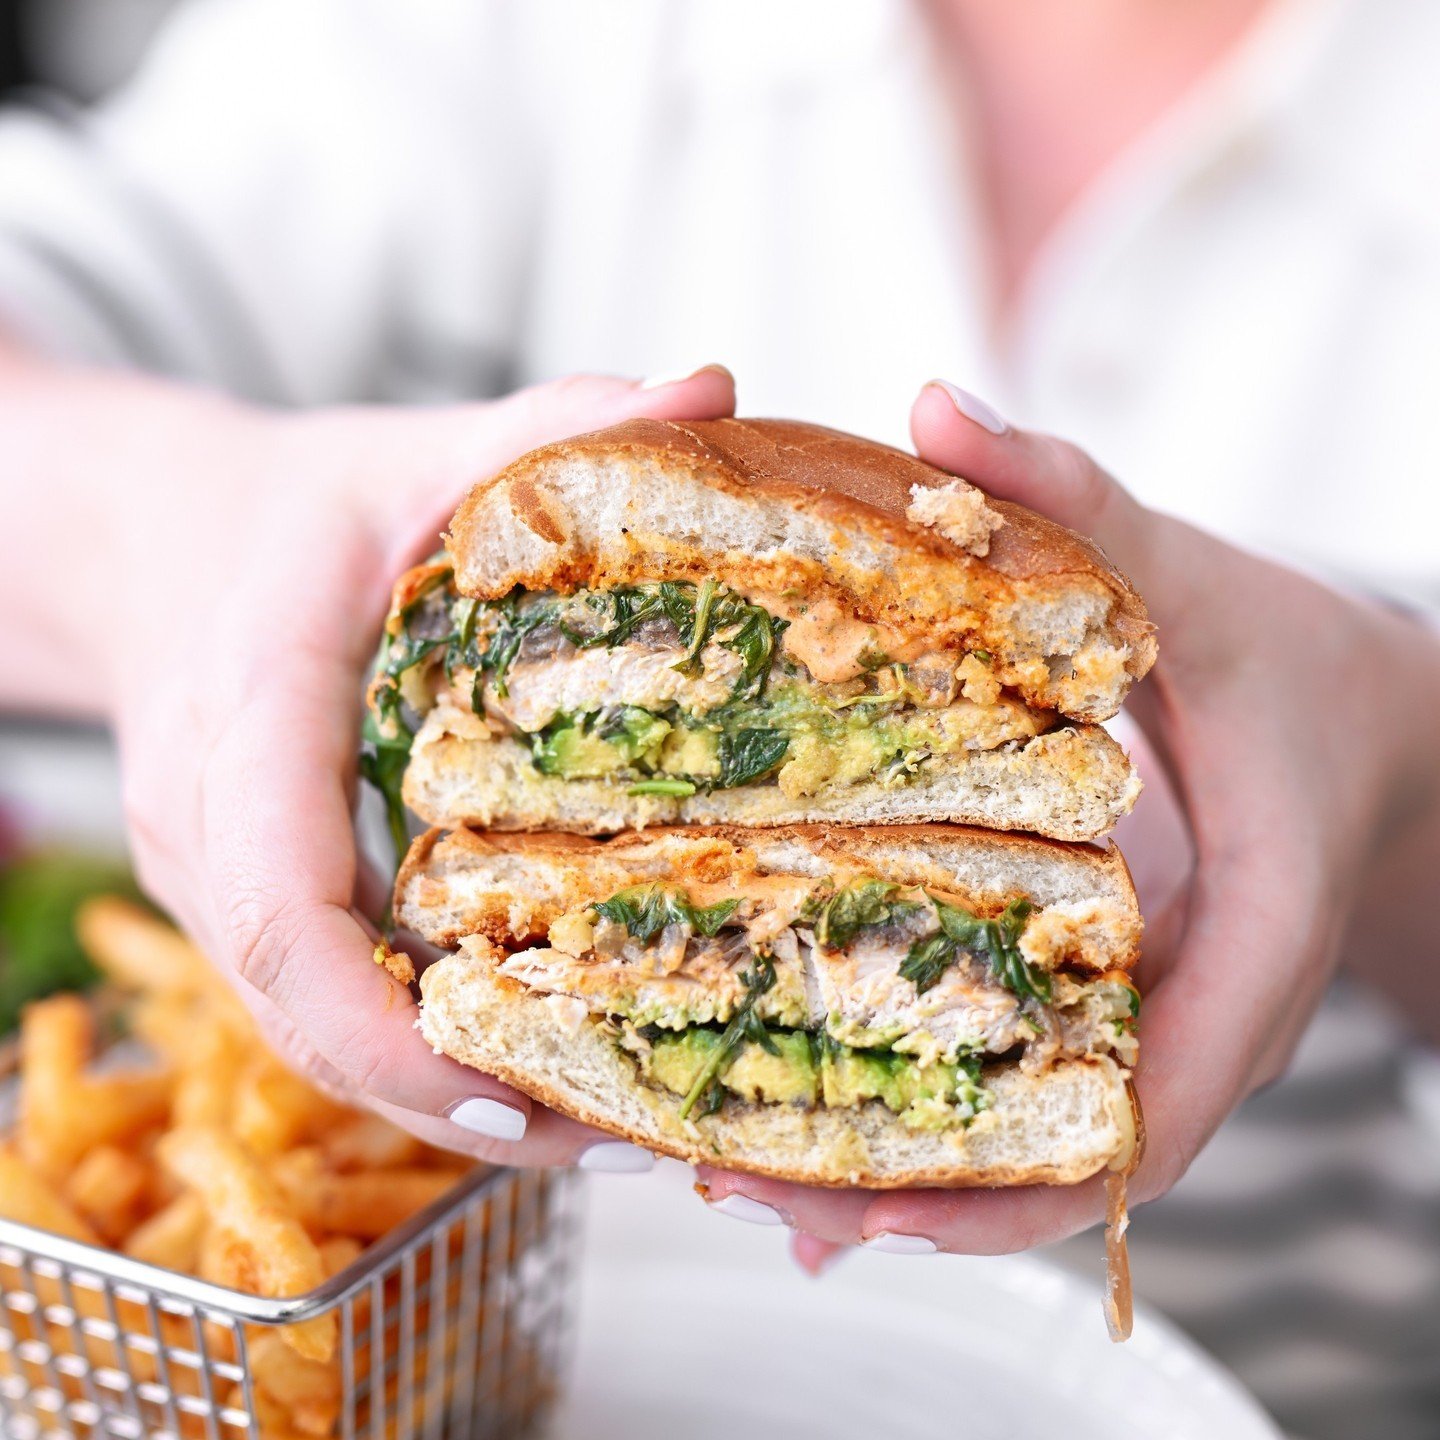 A two hand sandwich?  Don't mind if we do.  Our Grilled Chicken sandwich is a longtime lunchtime favorite featuring provolone, grilled onion, paprika aioli, arugula, and fresh avocado.  #cottagewellesley